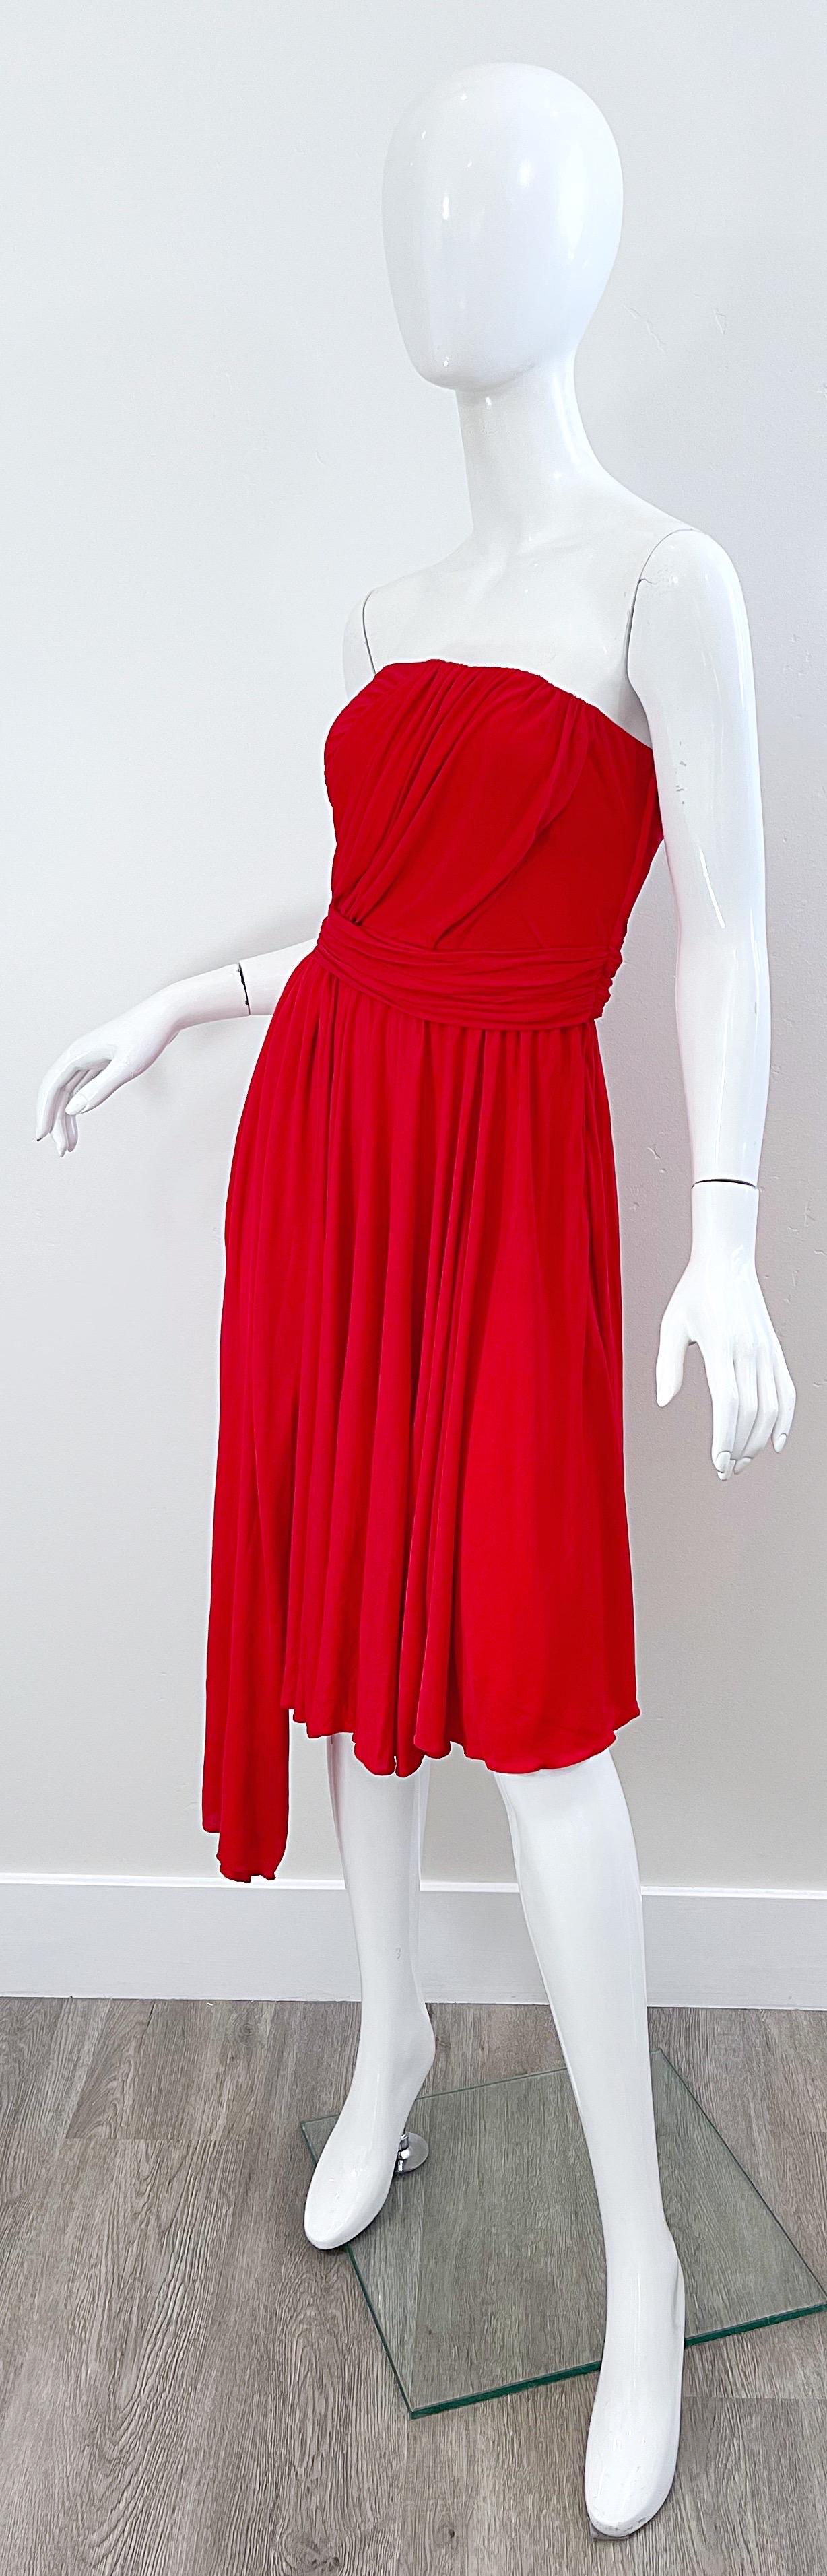 Runway Yves Saint Laurent S/S 1989 Lipstick Red Rayon Jersey Strapless 80s Dress For Sale 2